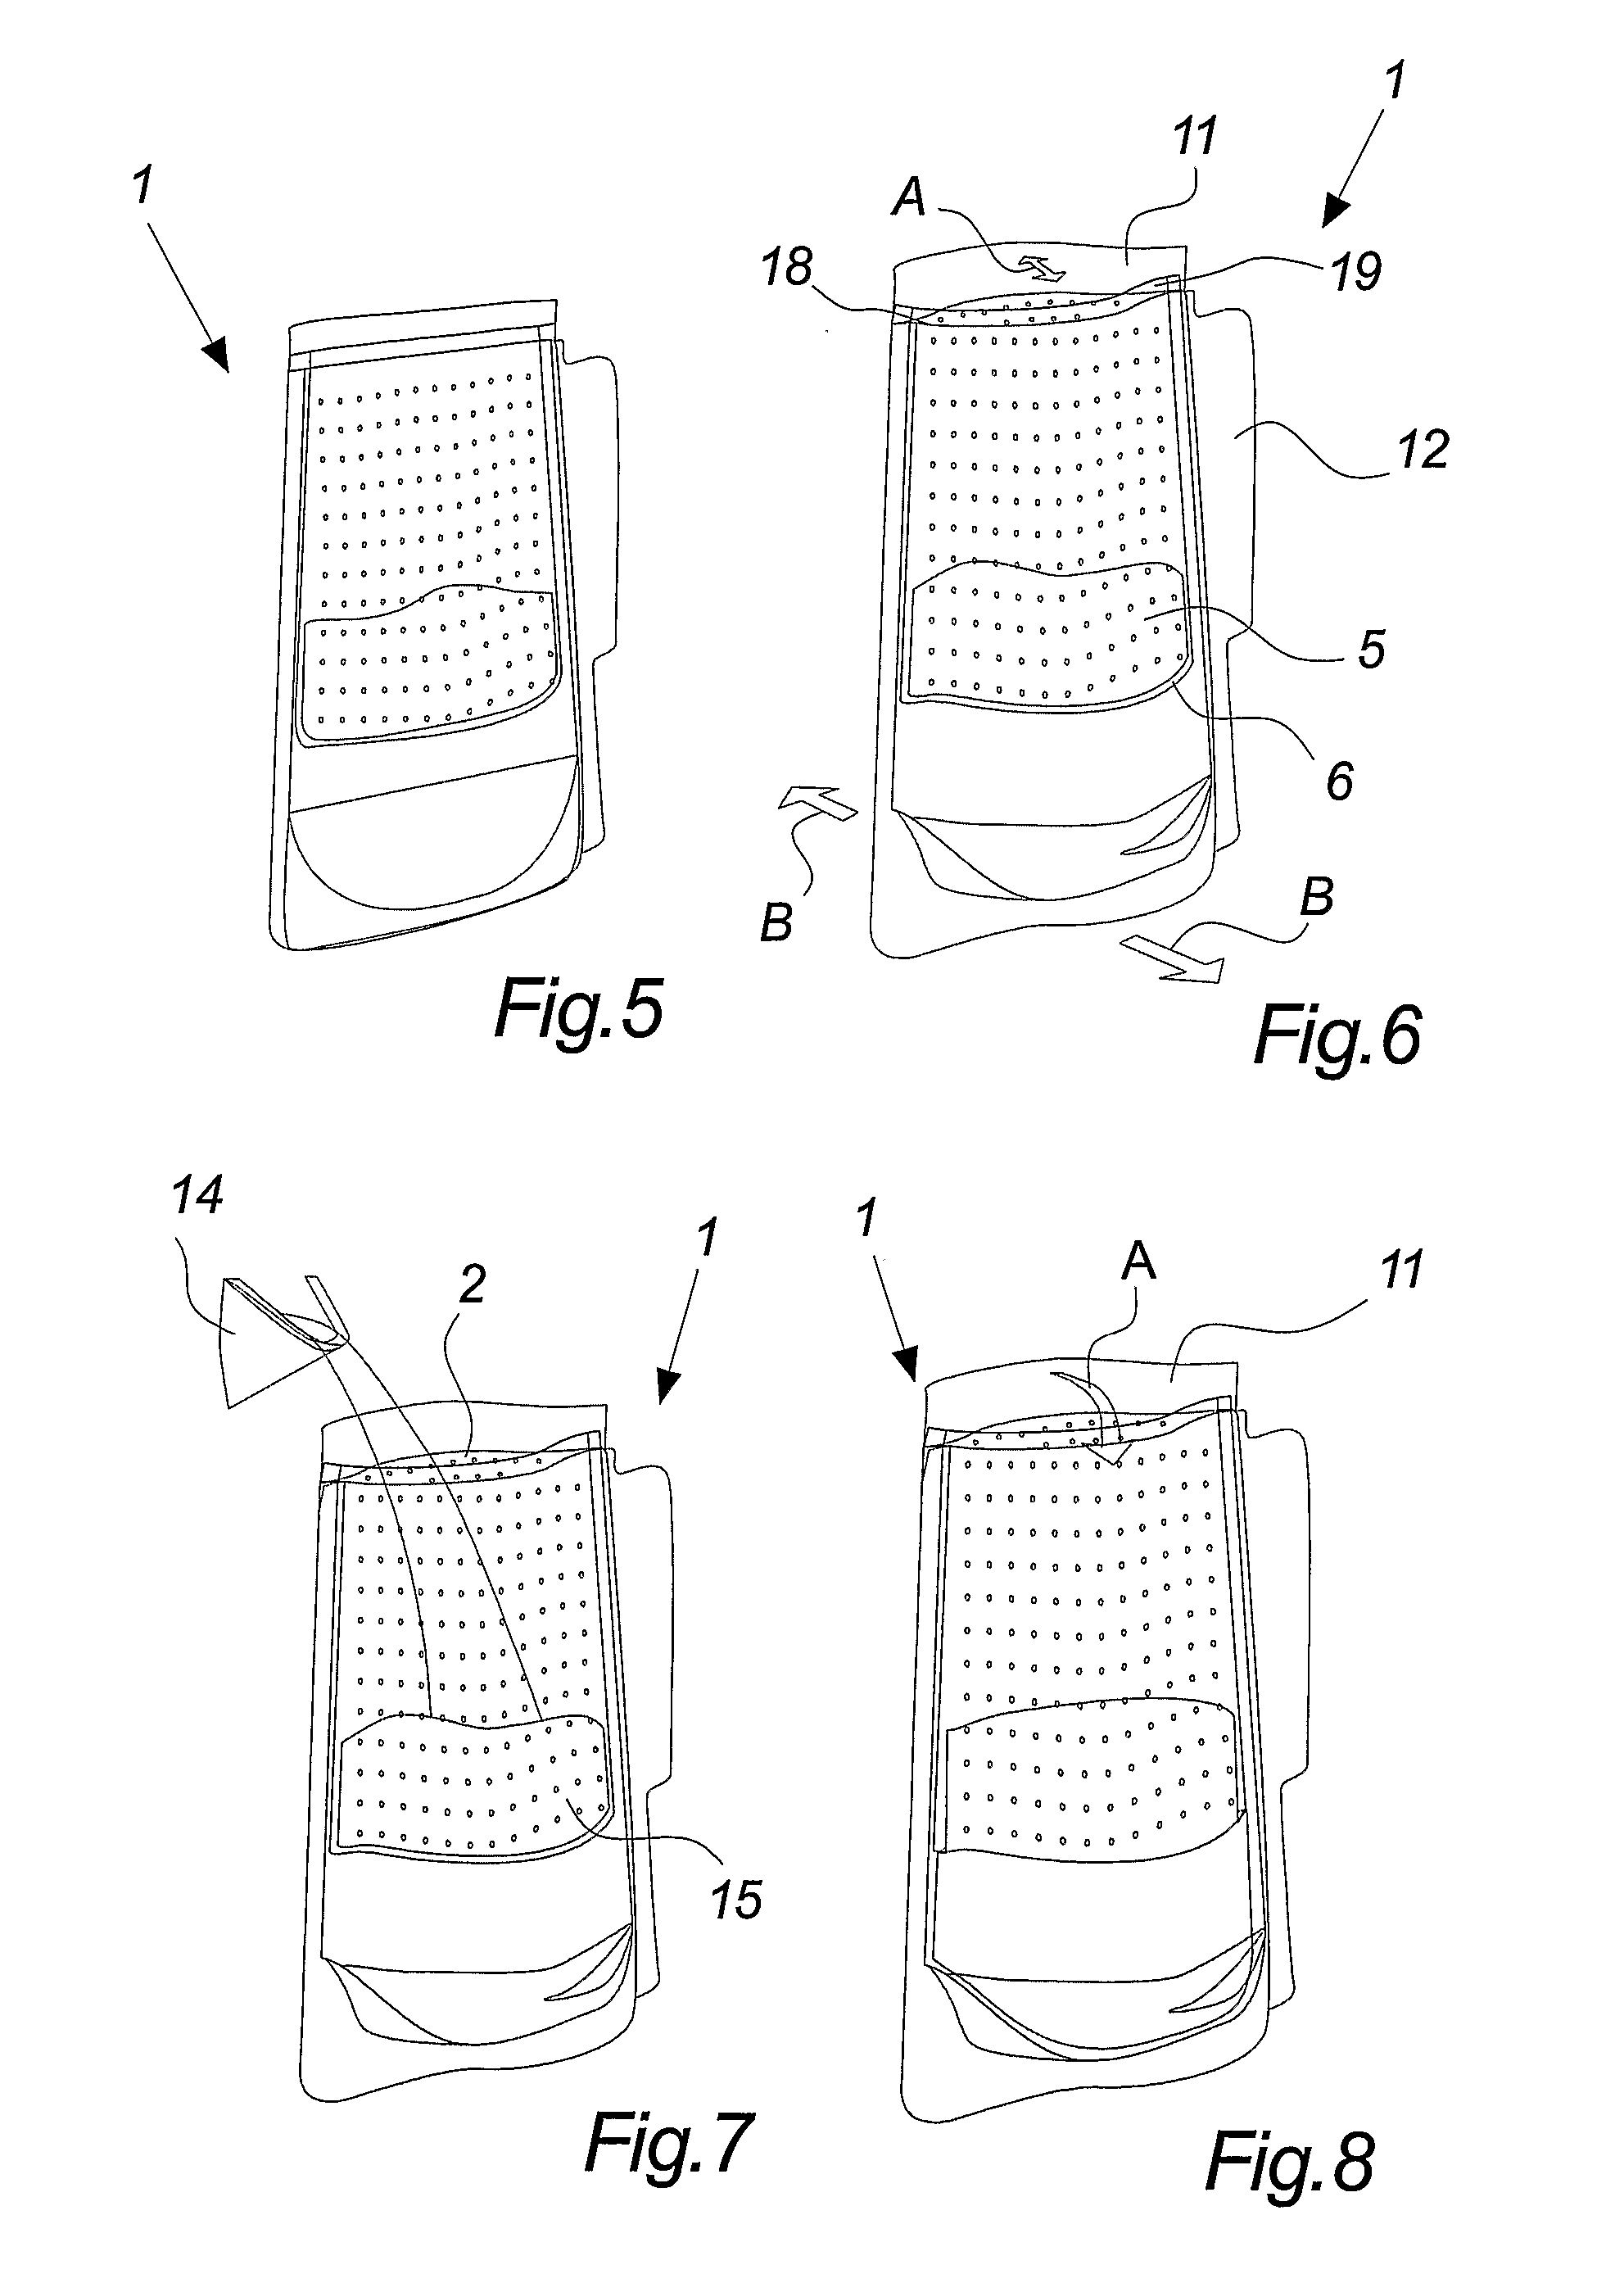 Disposable Brewing Device